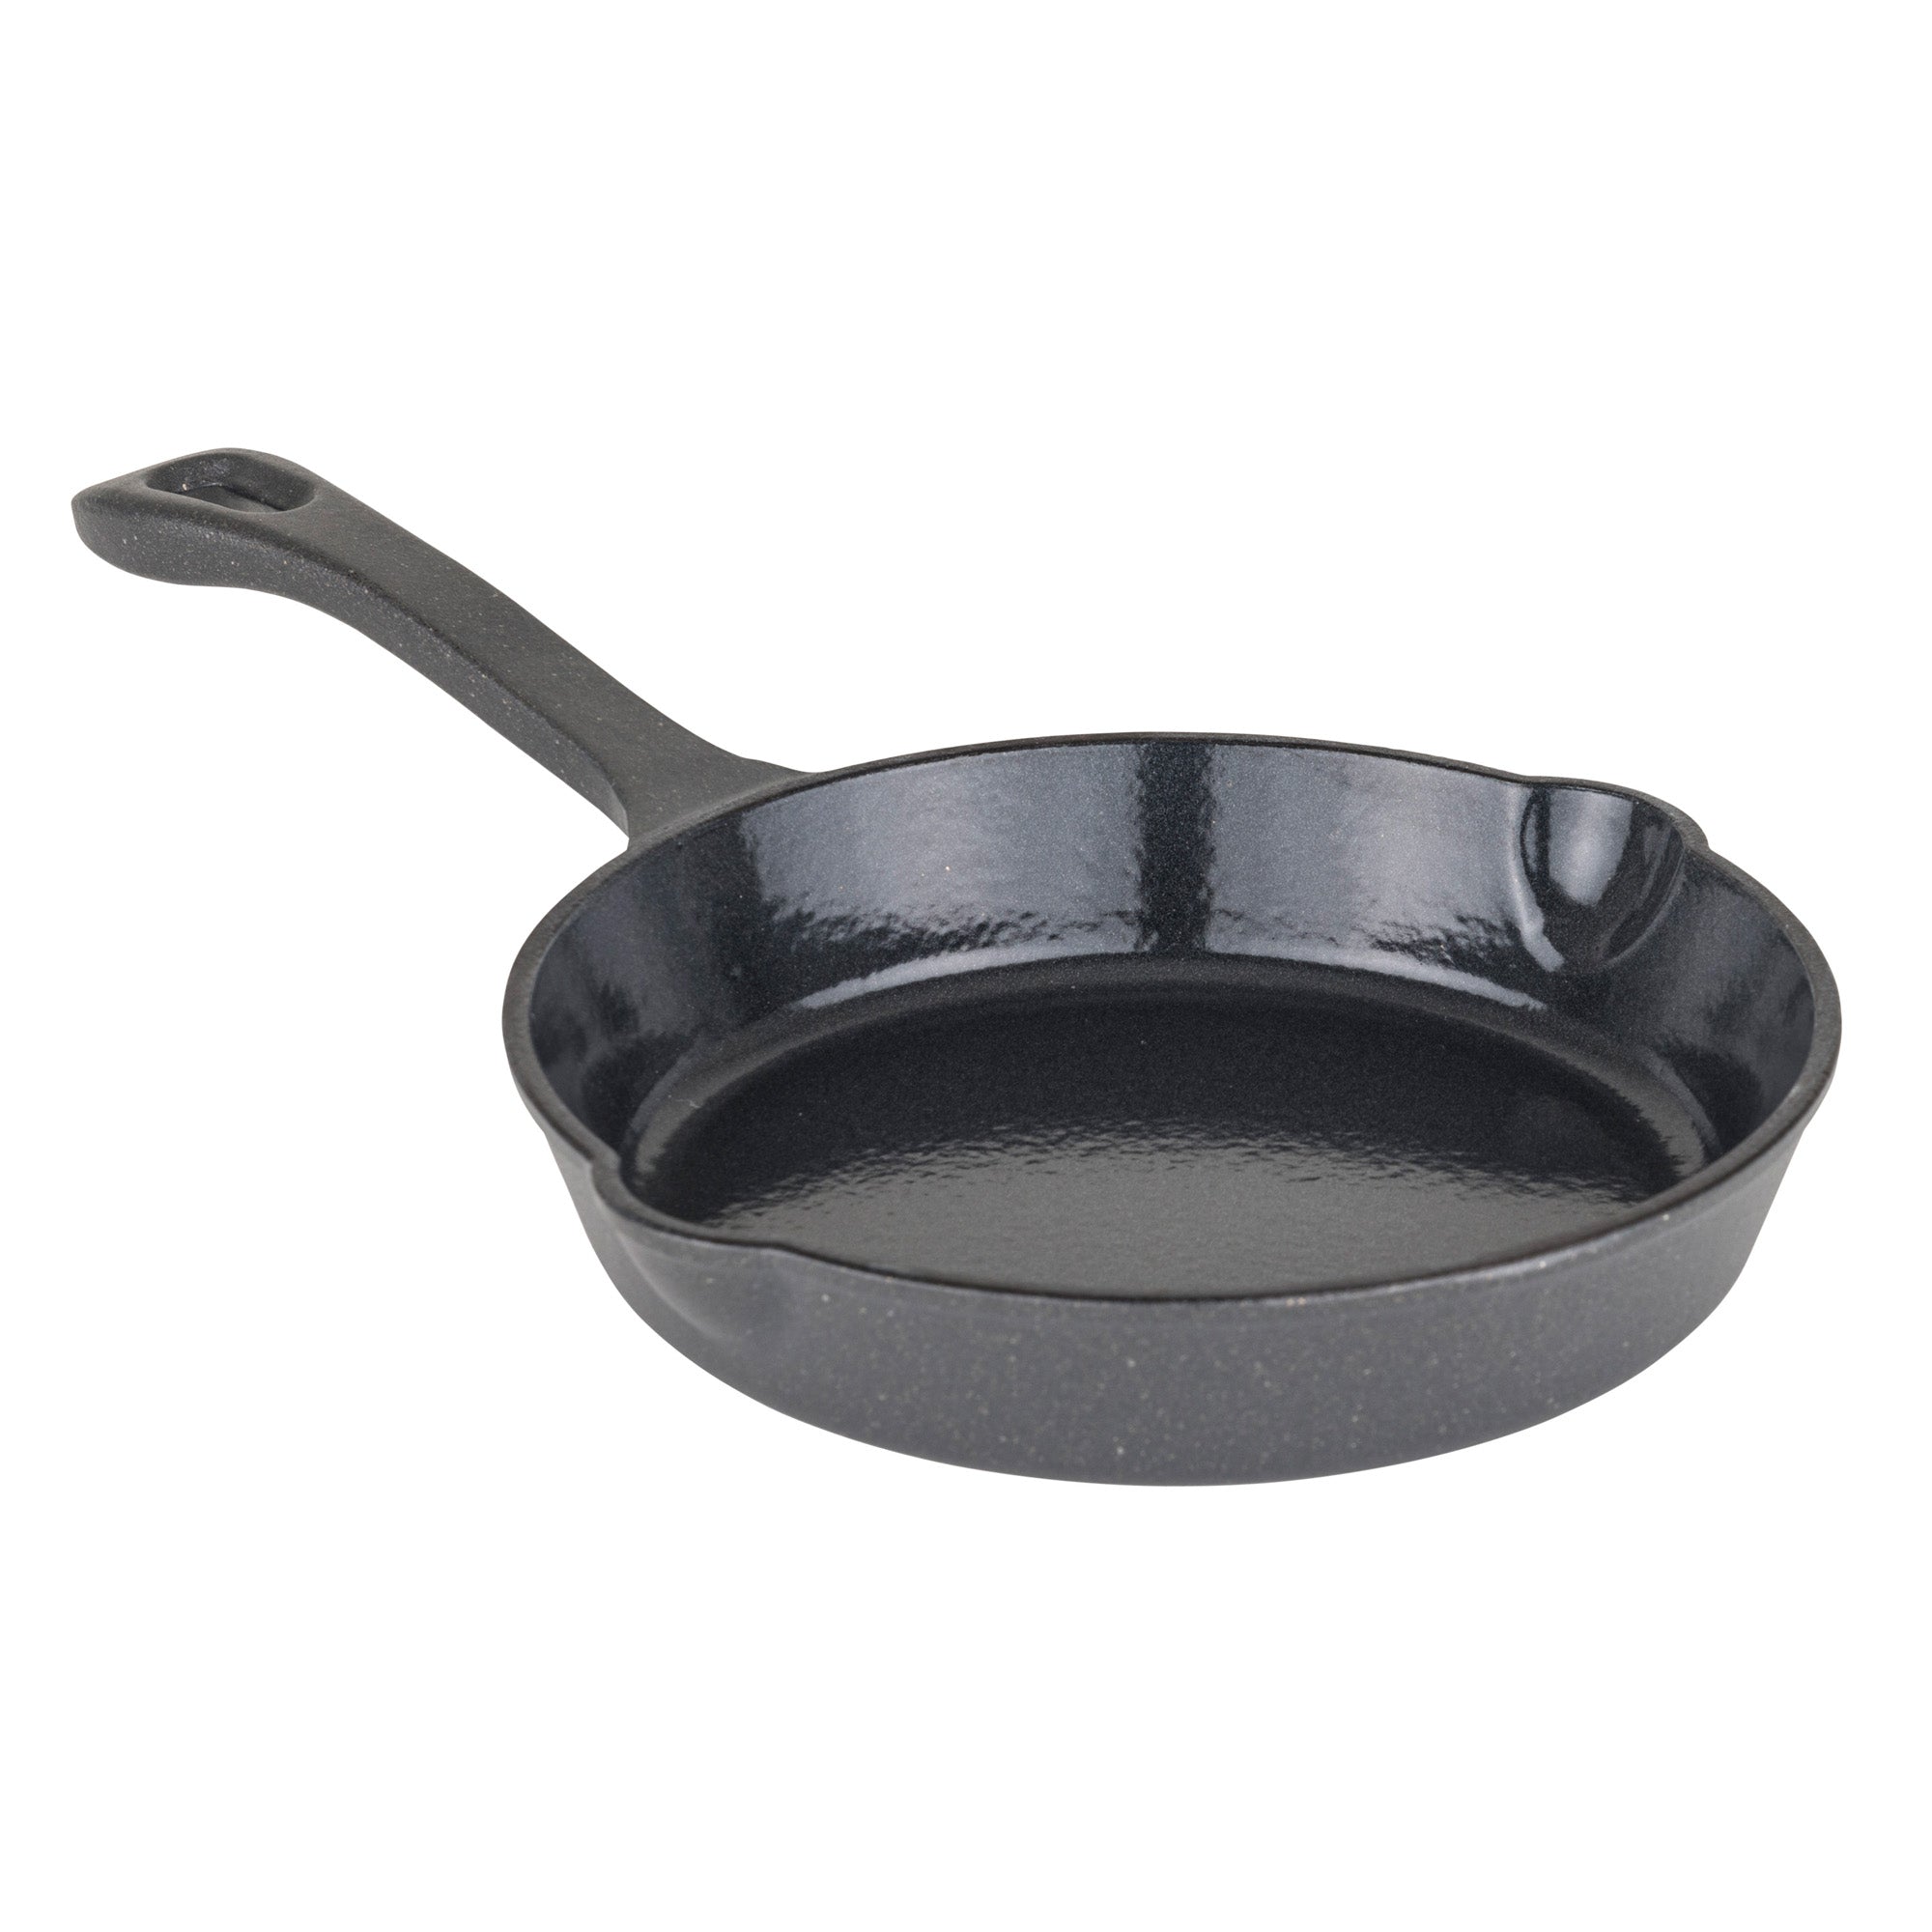 Enamel Coated Cast Iron Cookware, Free US Shipping